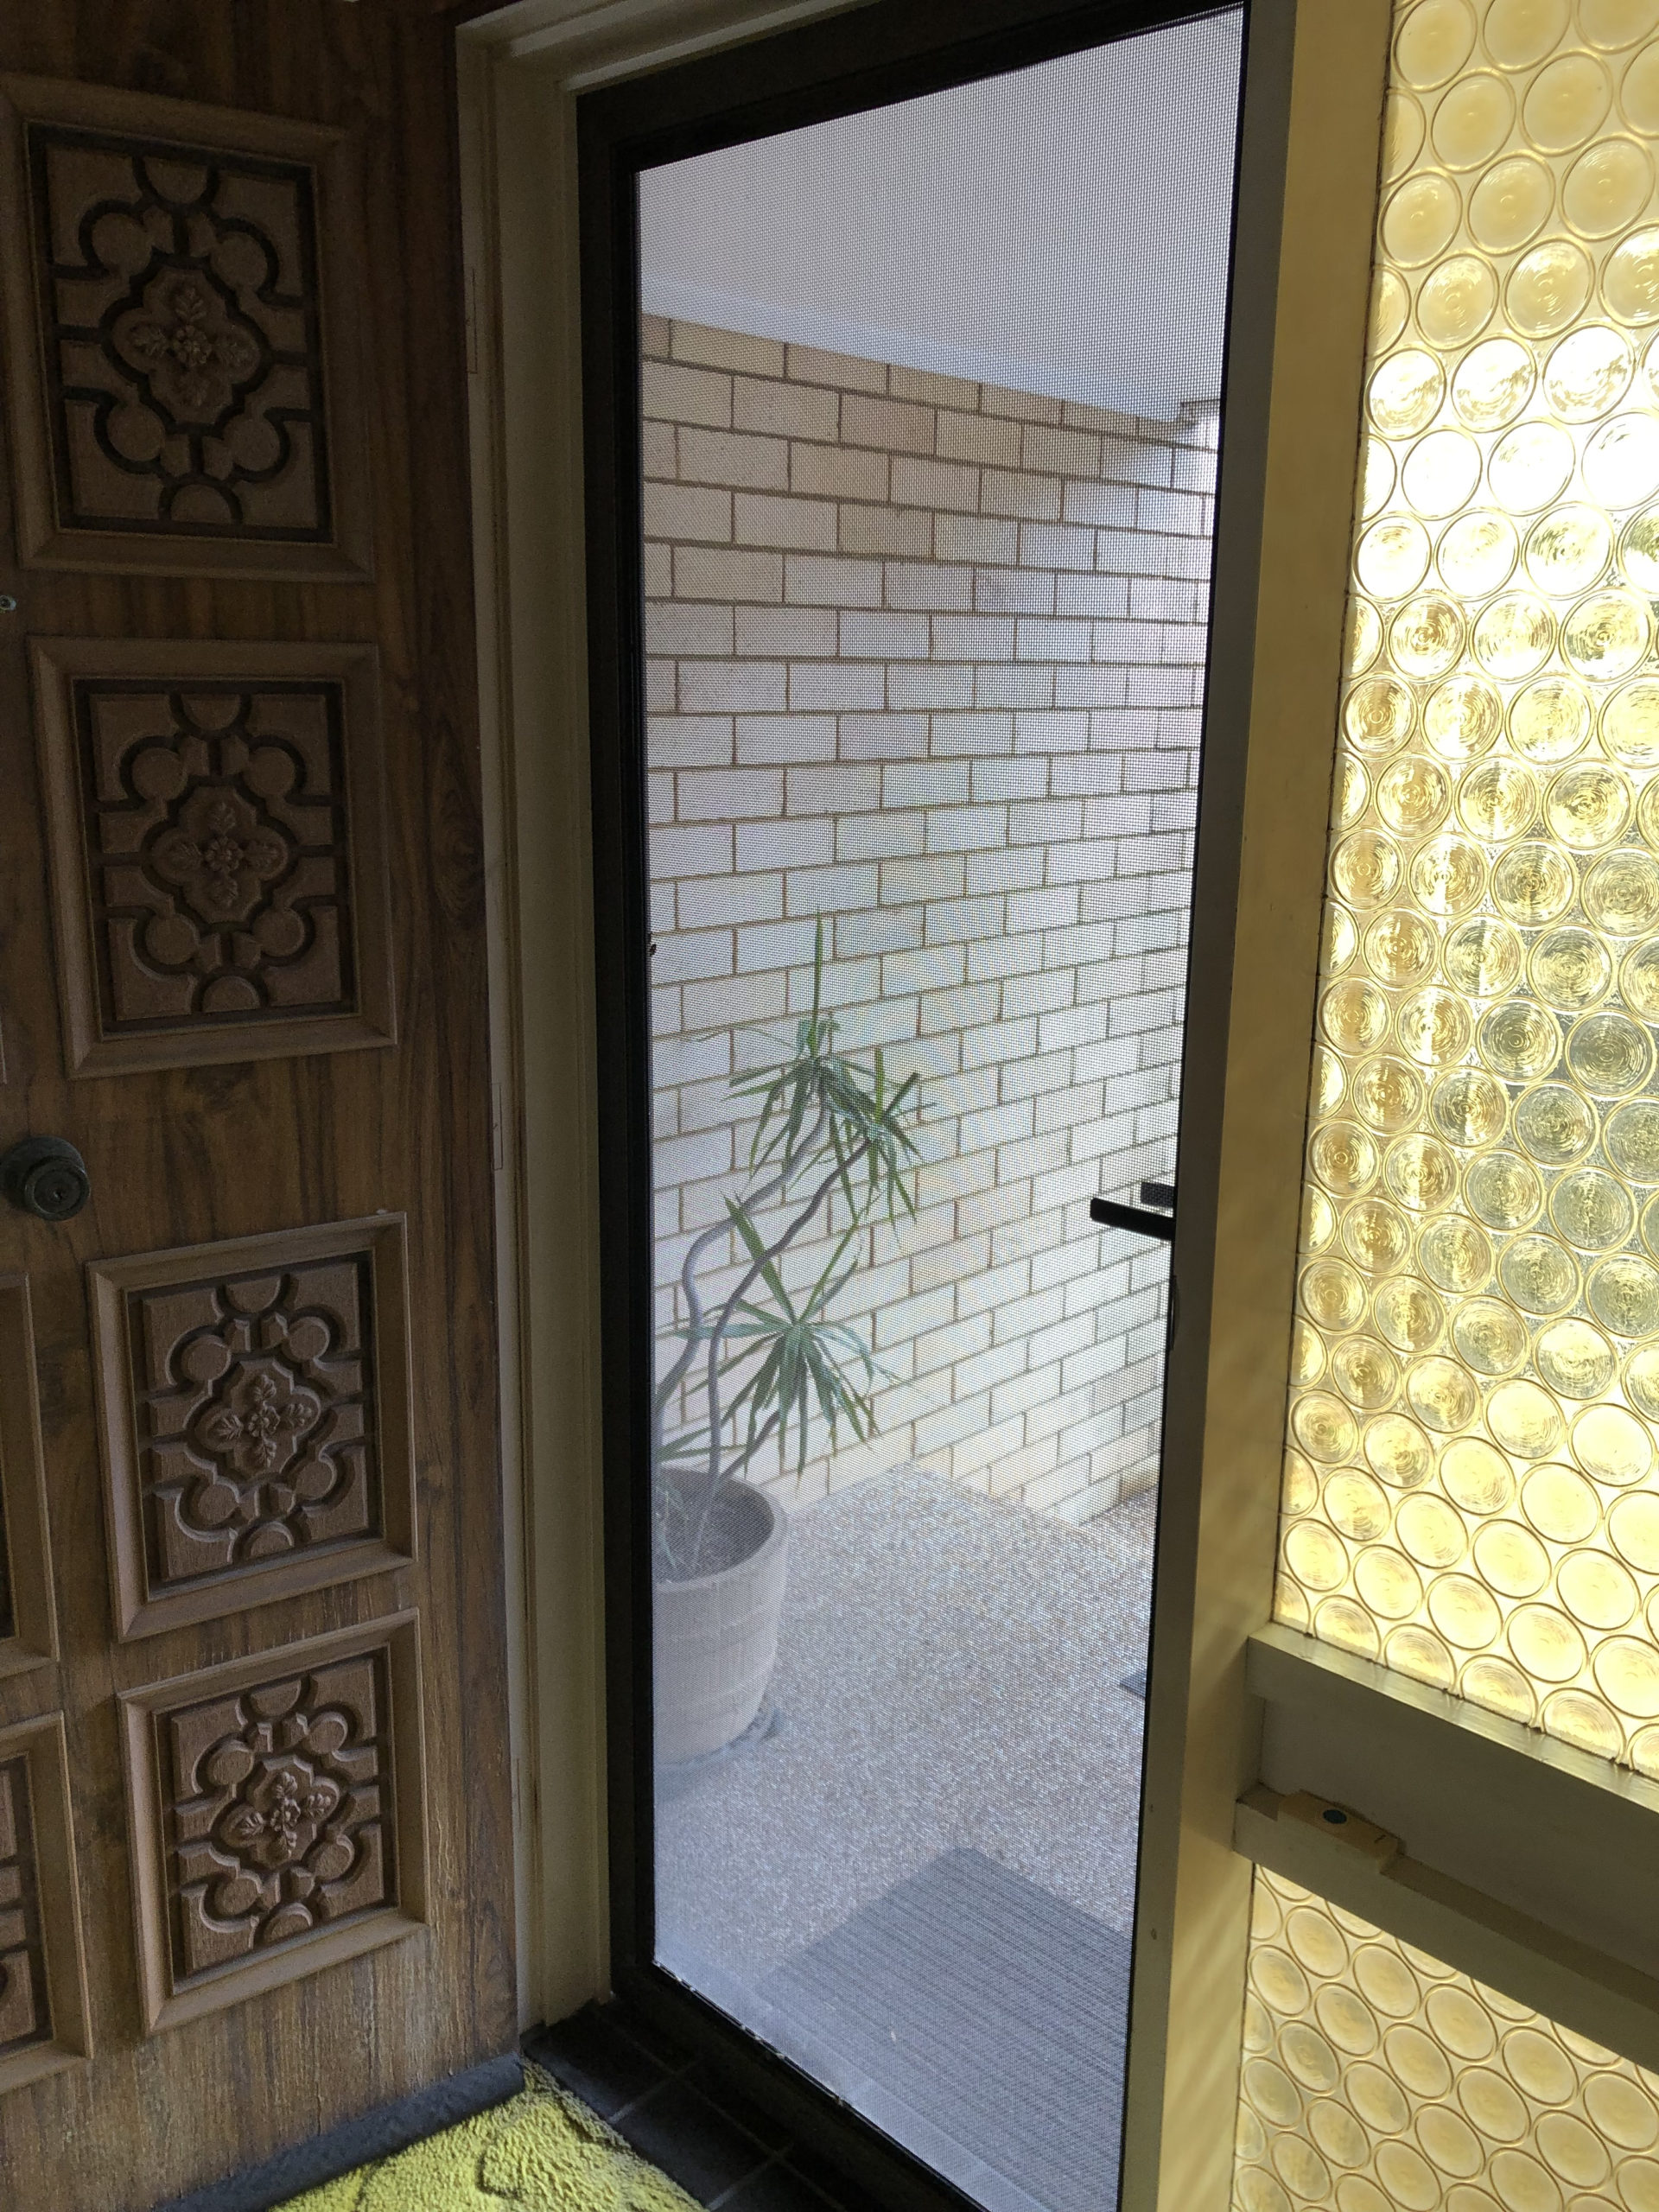 door with molded patterns, side window with yellow plastic bottle end style glass